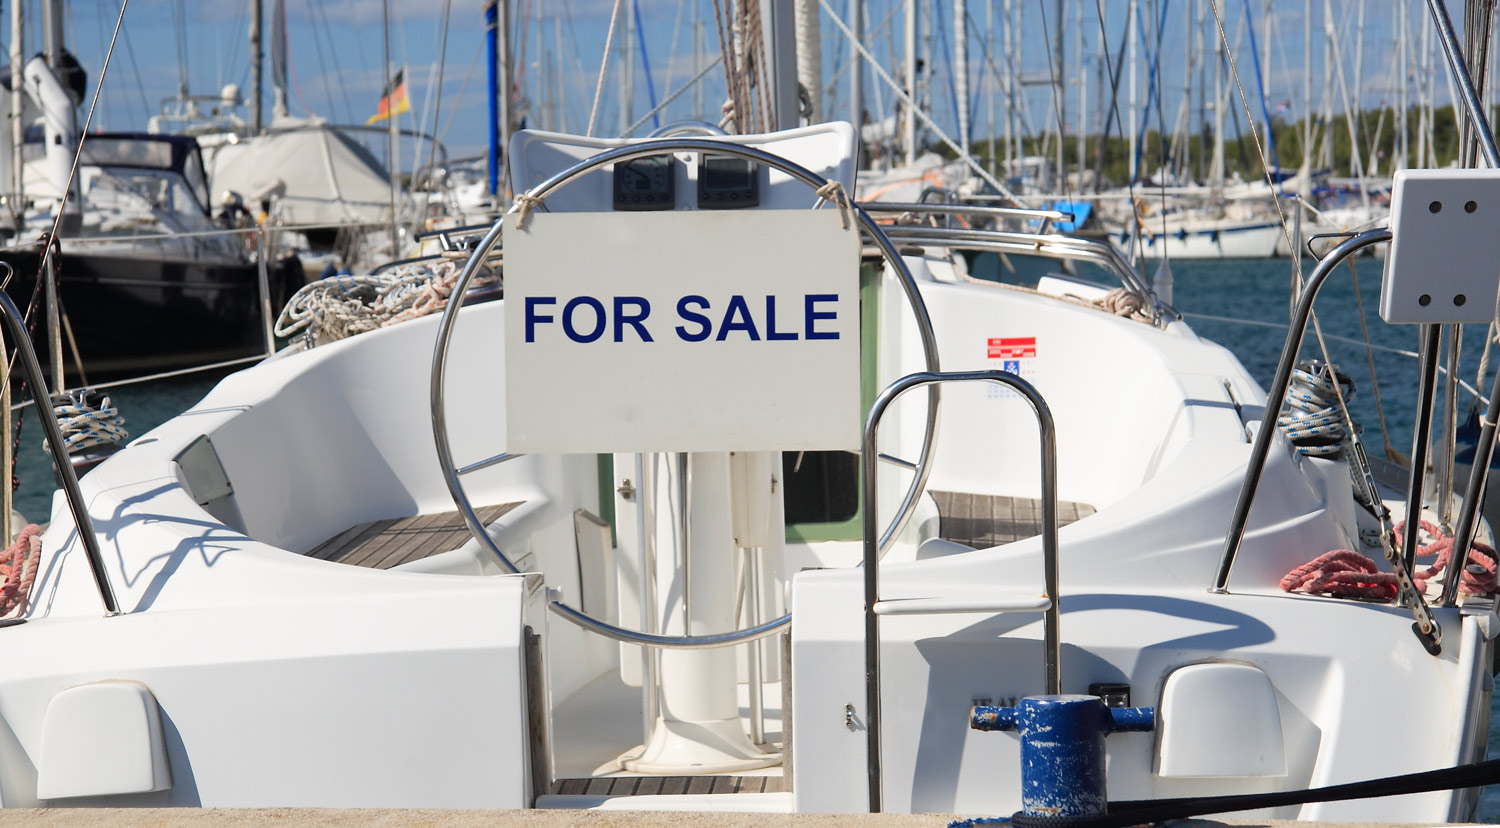 OUR YACHTS FOR SALE